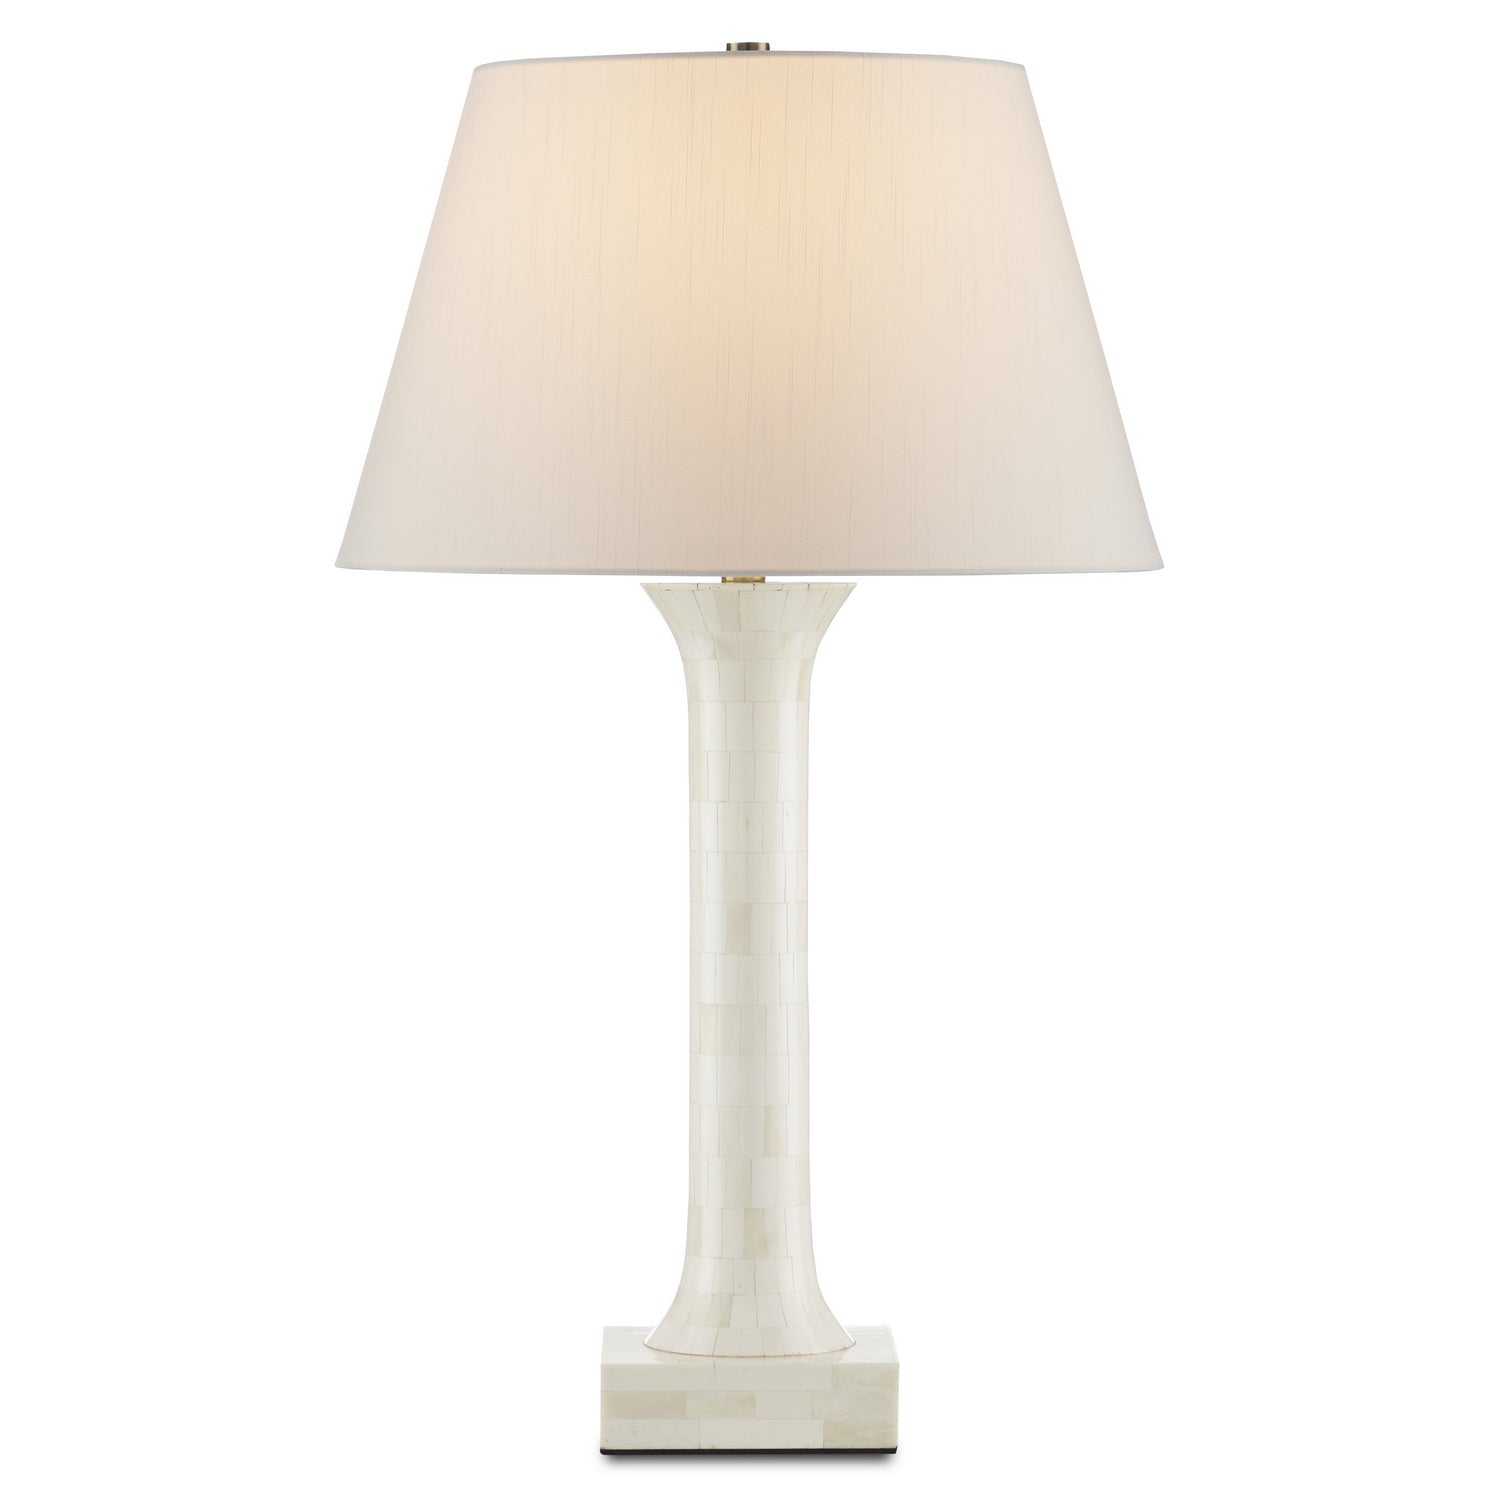 Currey and Company - 6000-0863 - One Light Table Lamp - Haddee - Natural Bone/Antique Brass